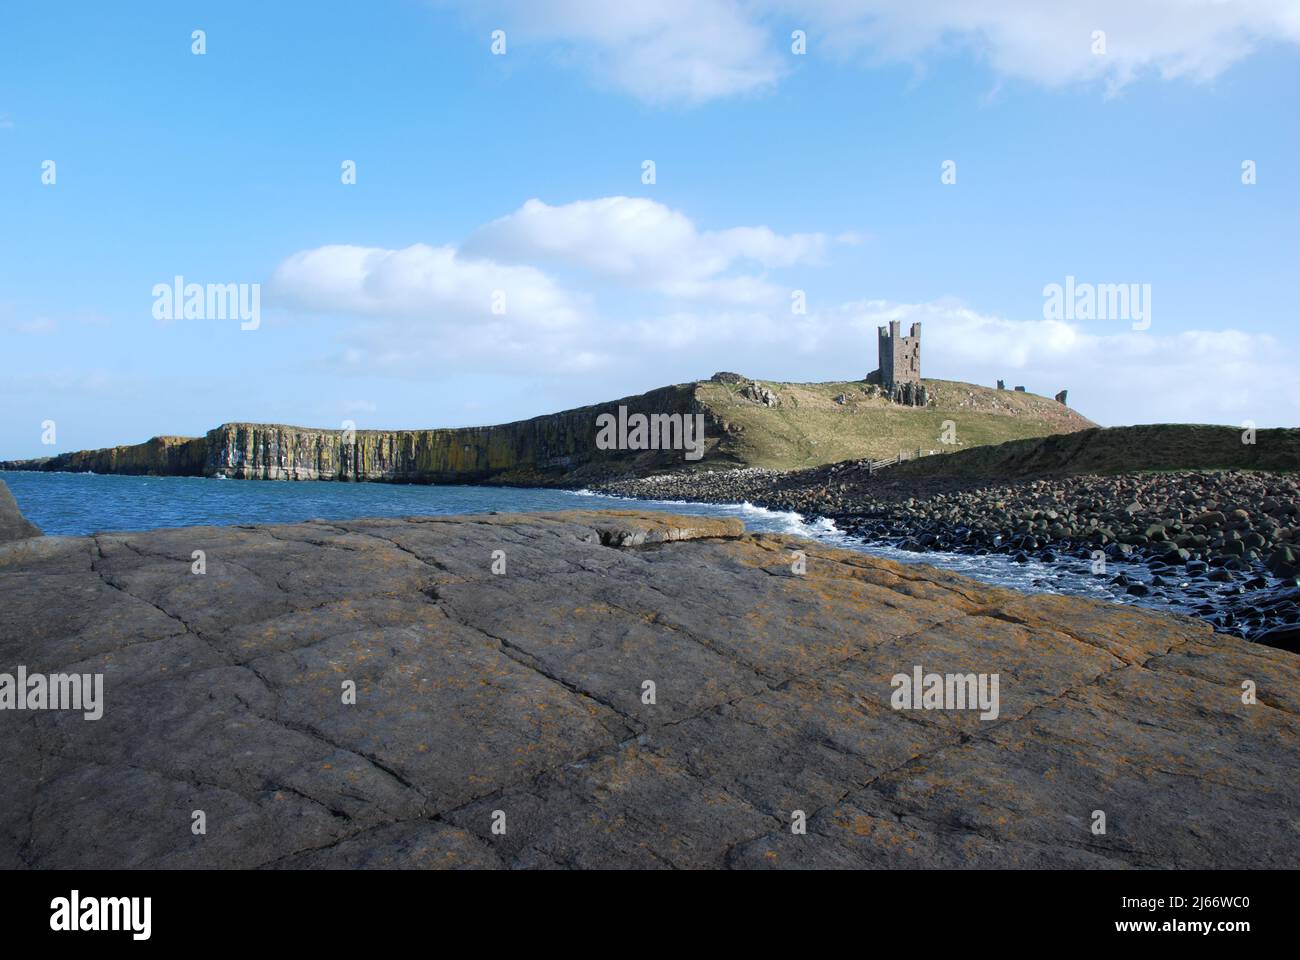 Landscape image showing Dunstanburgh Castle on its basaltic ridge seen from the rocks along the shoreline Stock Photo